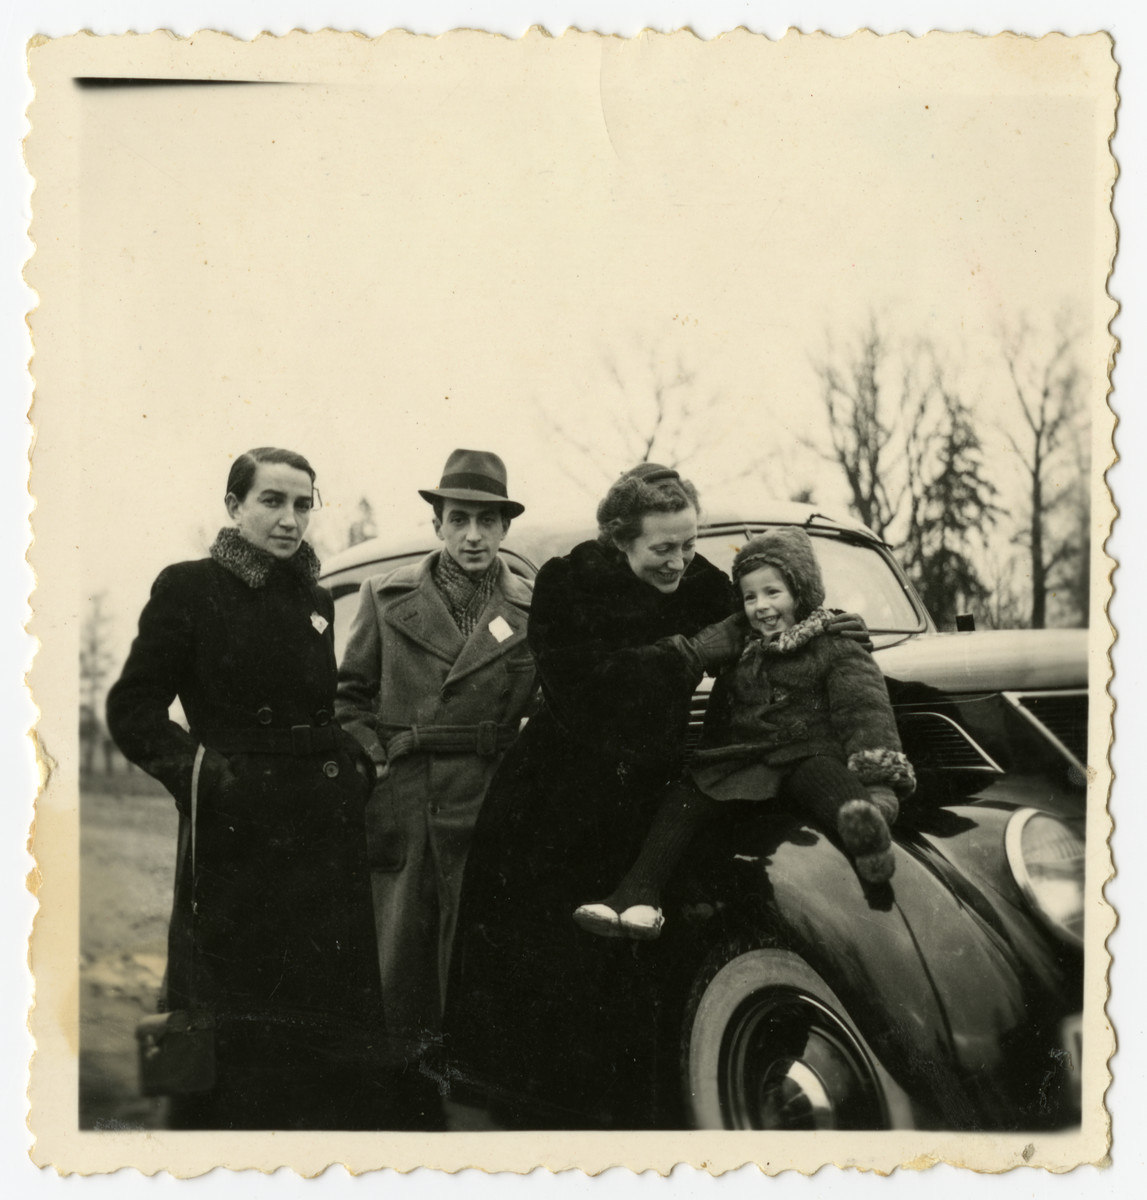 Rosian Bagriansky sits on top of her father's Ford next to her mother and family friends.

Gerta Bagriansky is pictured second from the right next to her daughter Rosian.  Rivka Smukler Osherovitz is on the far left.